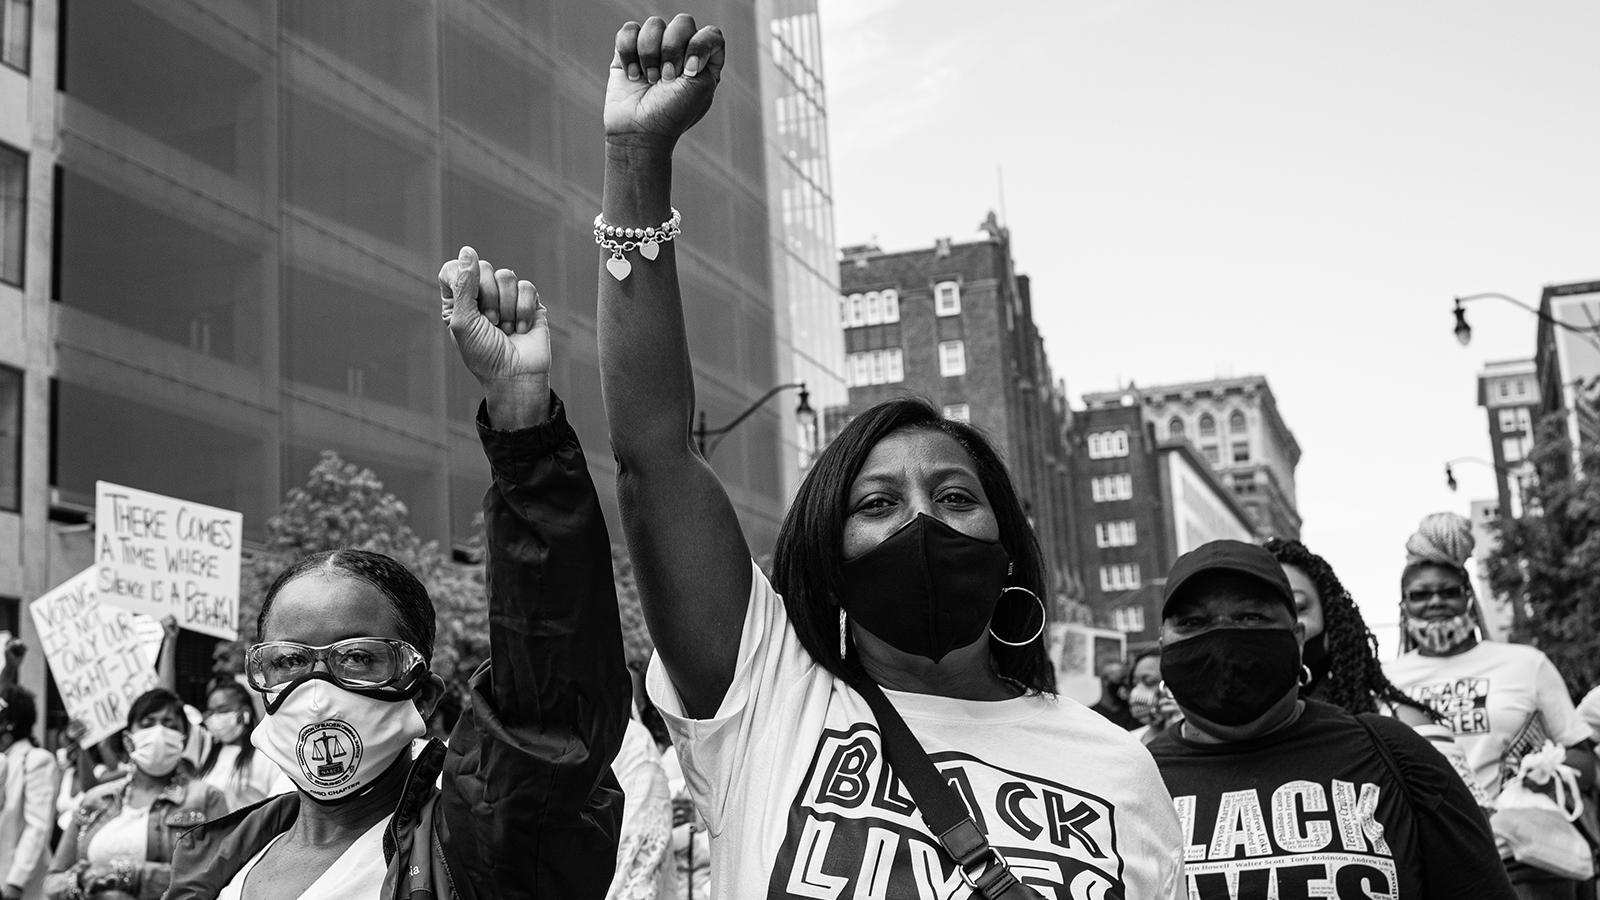 Three Black protestors stand in a street, masked. Two have arms raised